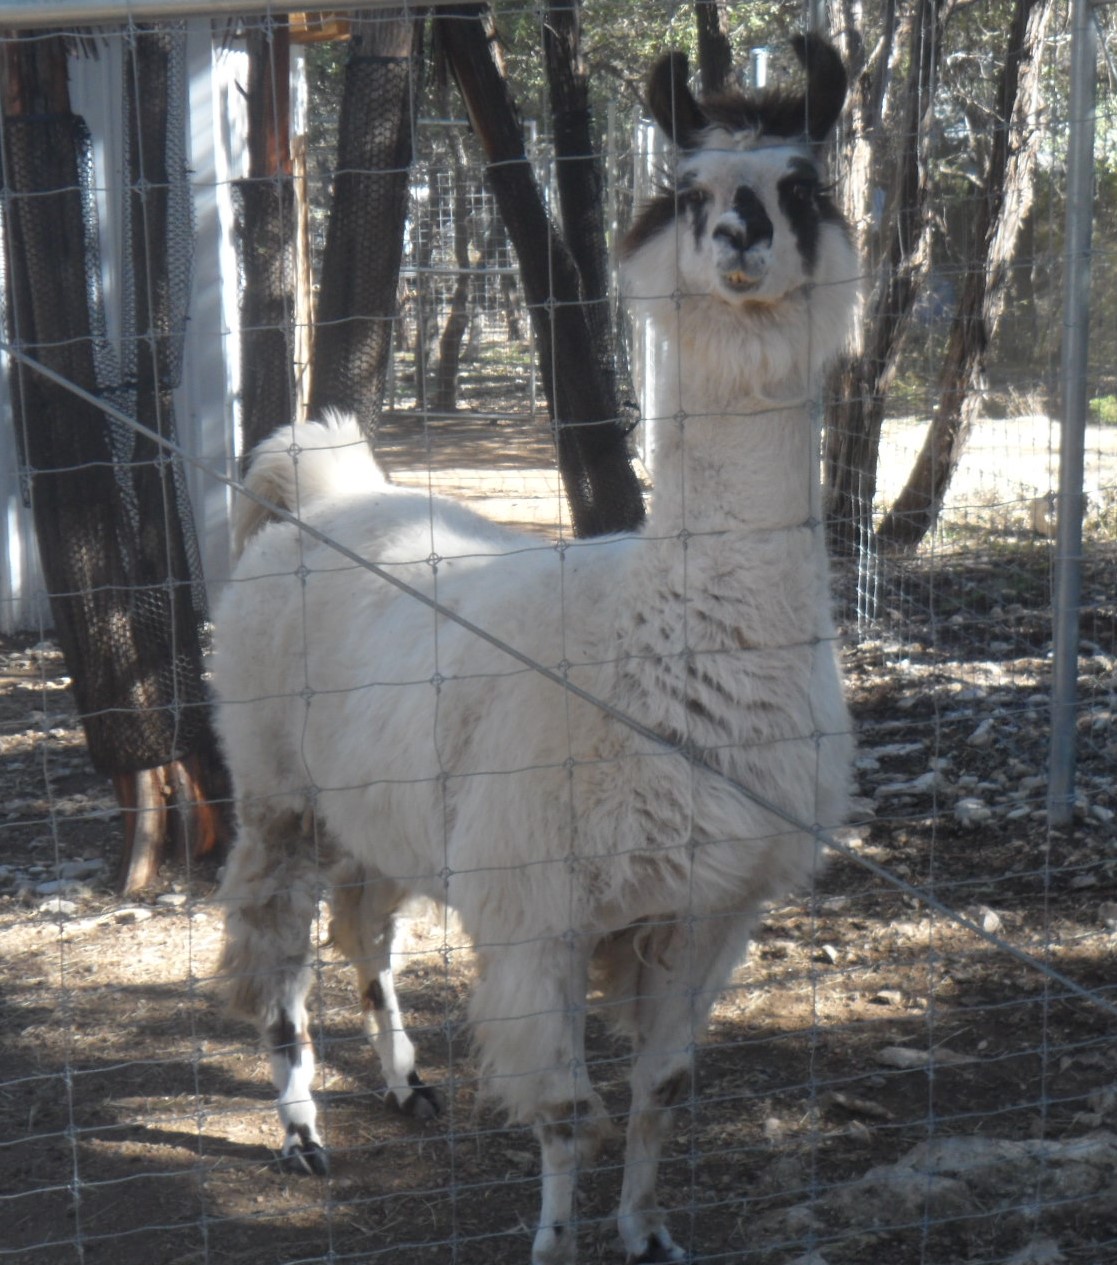 Connor was sad because there was no feed left for the llama.